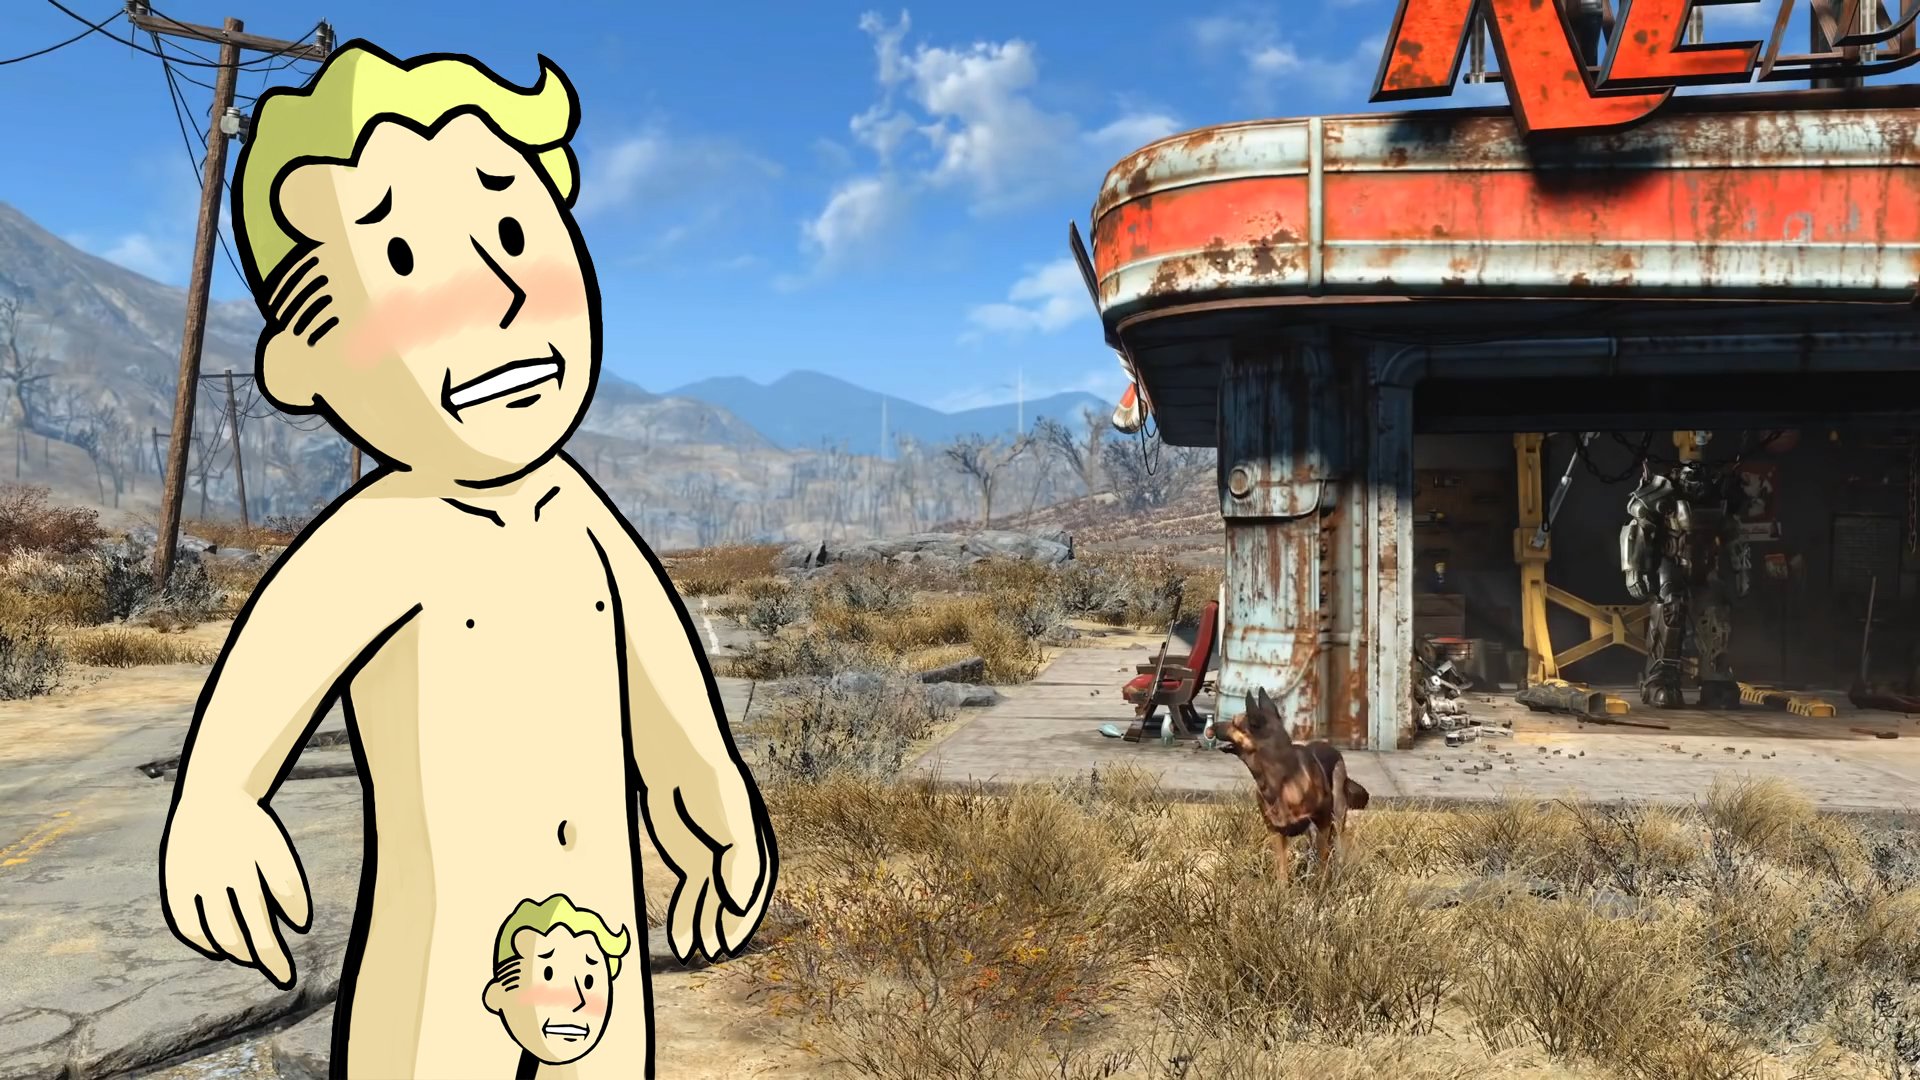 Fallout какой год в игре. Фоллаут 4. Фоллаут 4 на Xbox 360. Толсторог Fallout. Fallout 4 ps3.